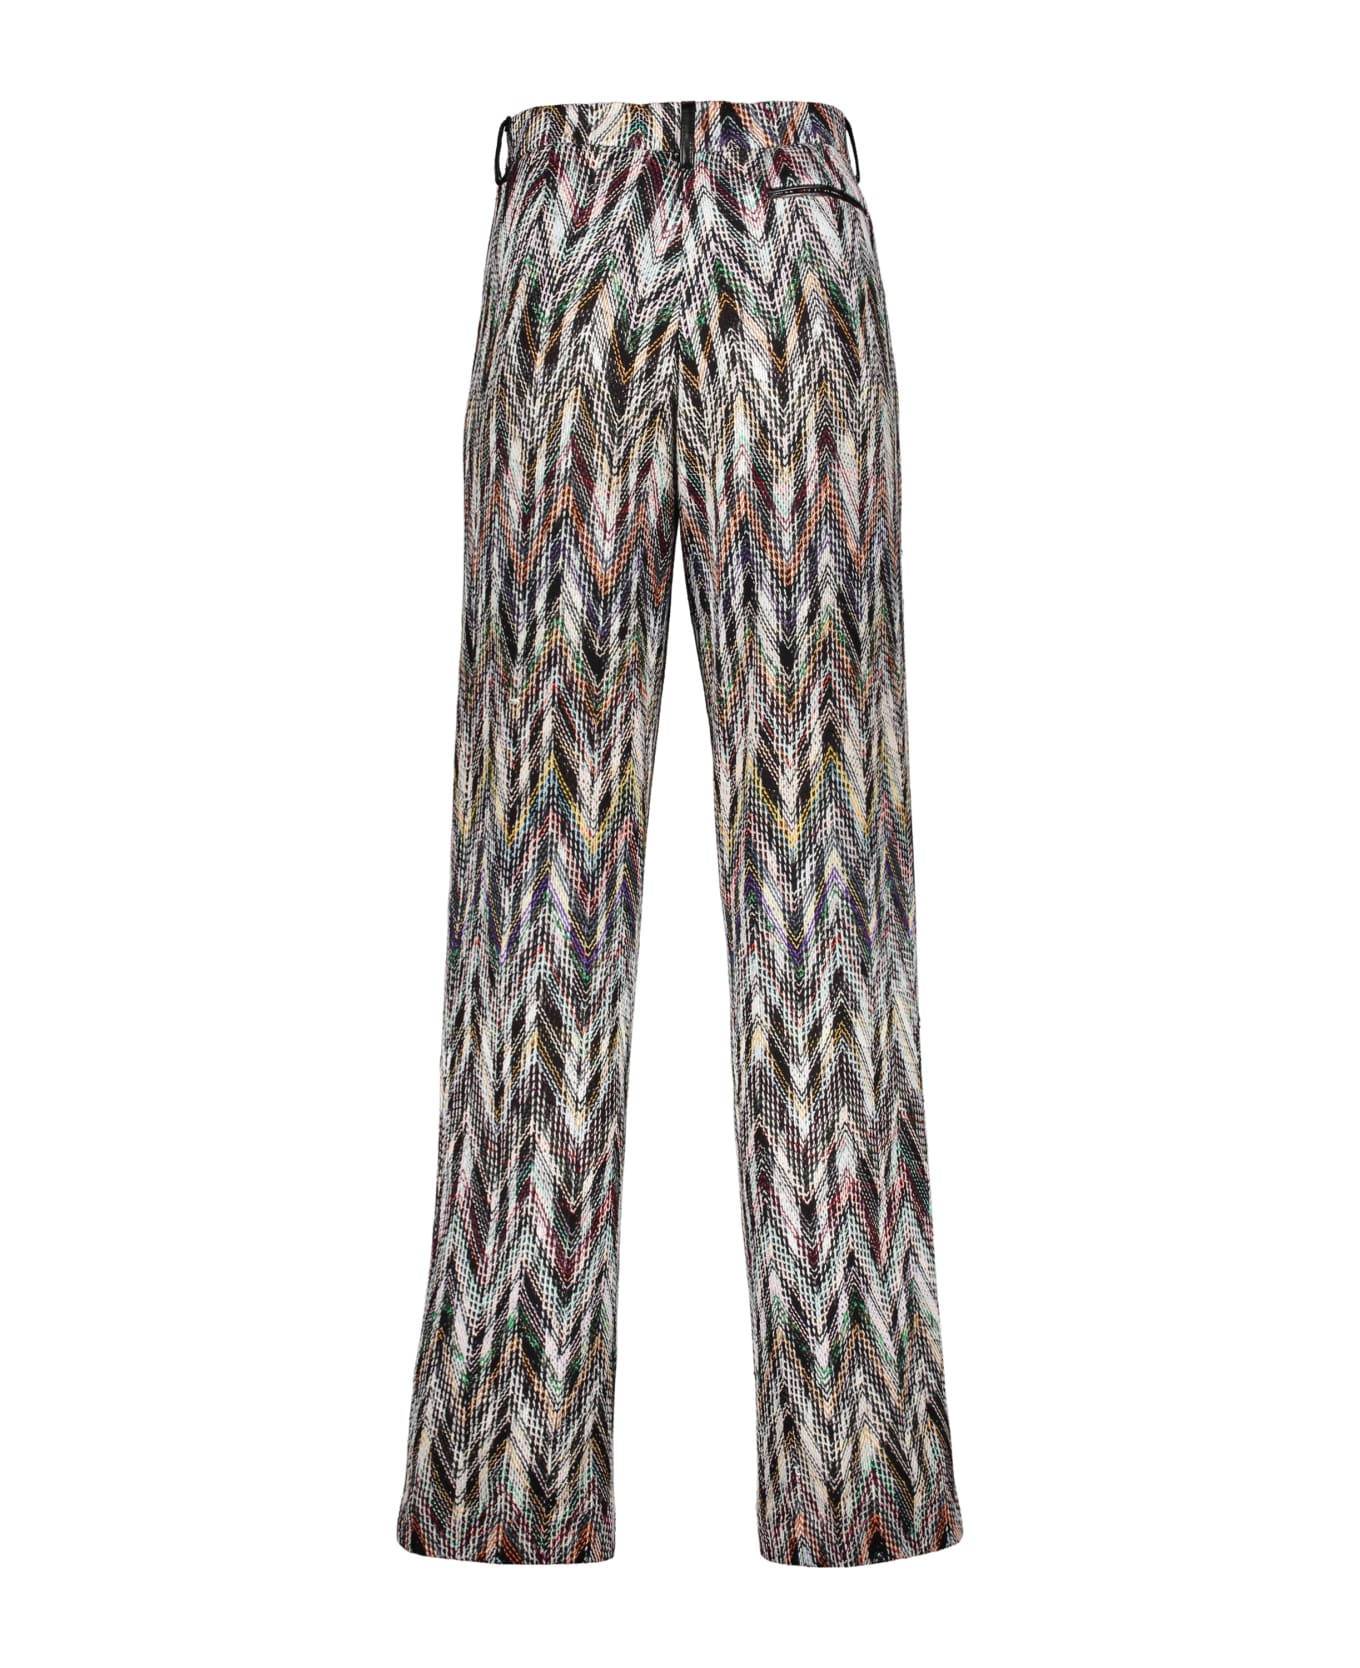 Missoni Chevron Knitted Palazzo Trousers - Multicolor ボトムス